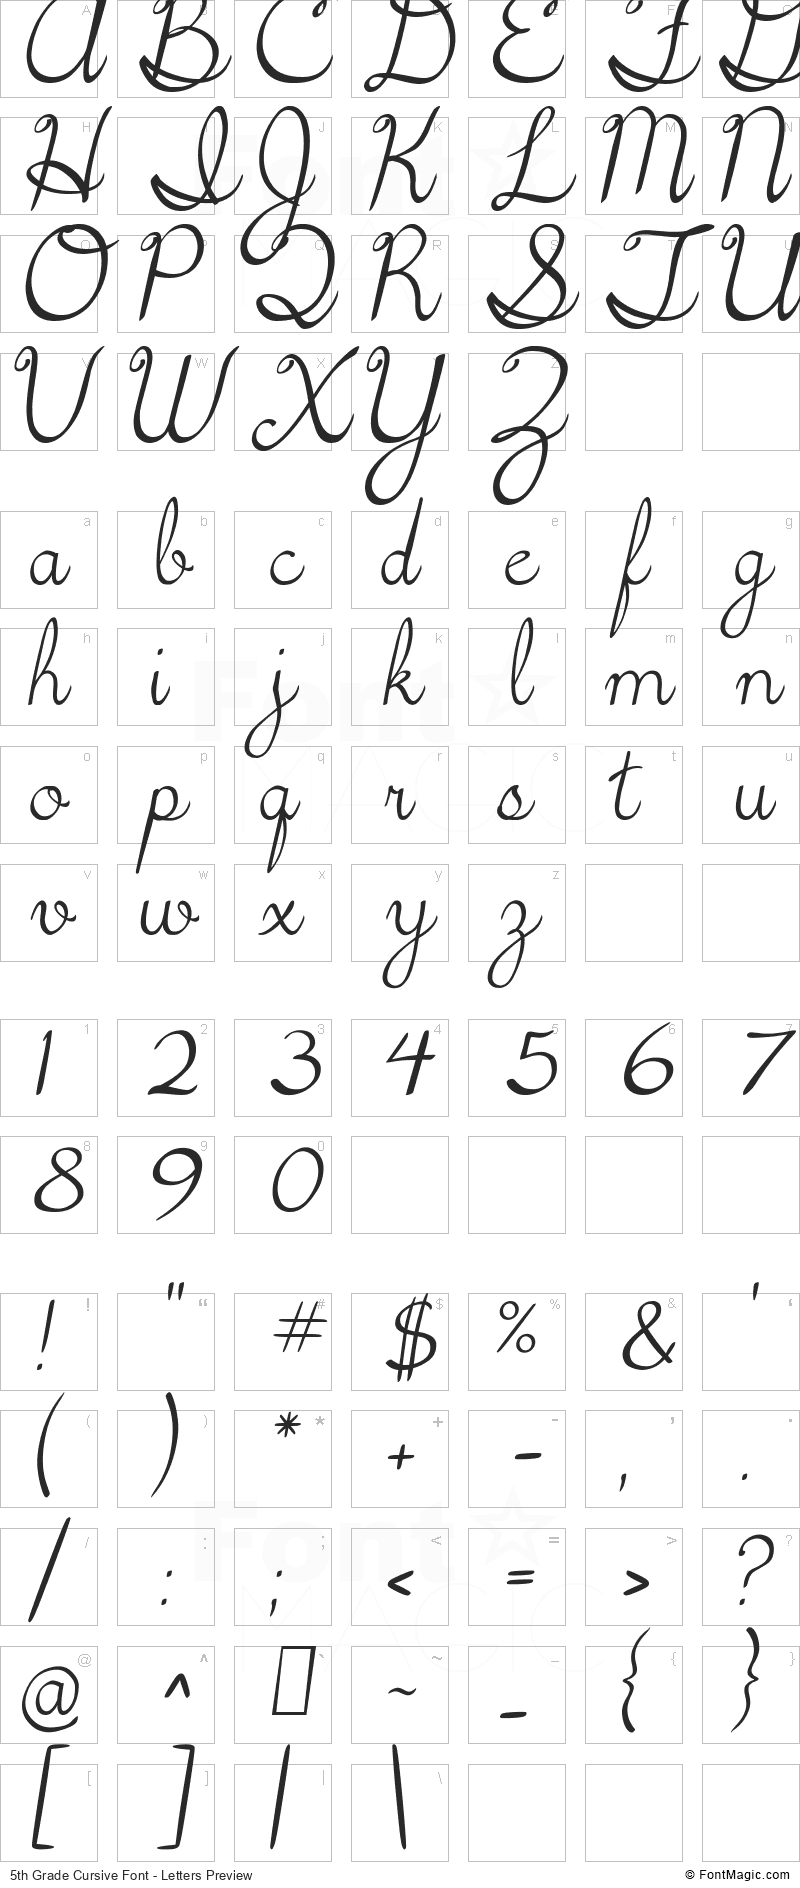 5th Grade Cursive Font - All Latters Preview Chart